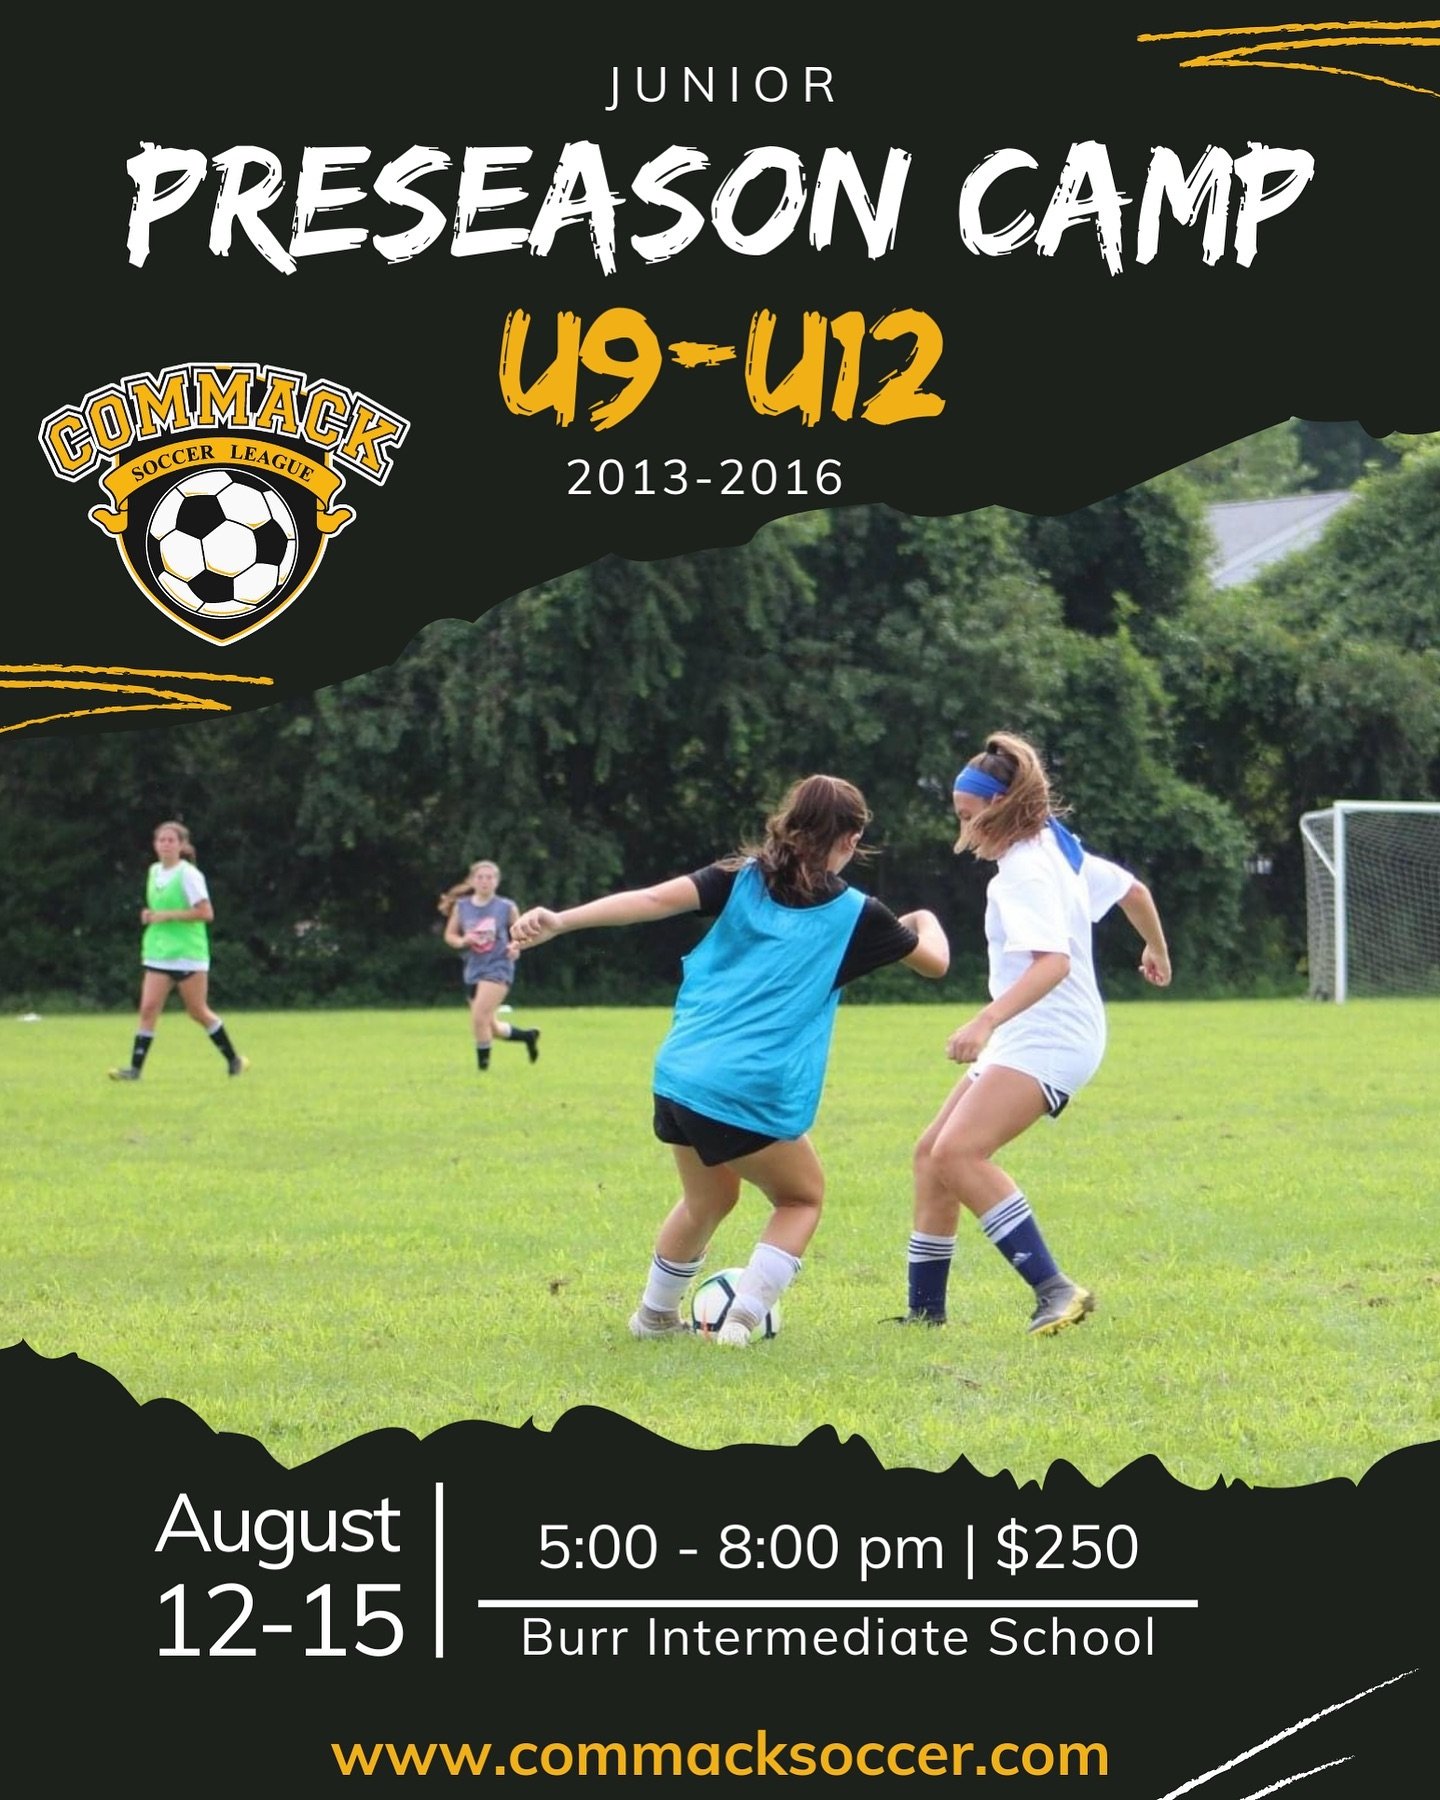 Our annual preseason camp will be held on August 12-15 from 5:00-8:00 pm @ Burr! This camp is open for all 2013-2016 players (future U9-U12). For more information or to register, please visit our website. Direct tryout link is located in our bio ⚽️ #